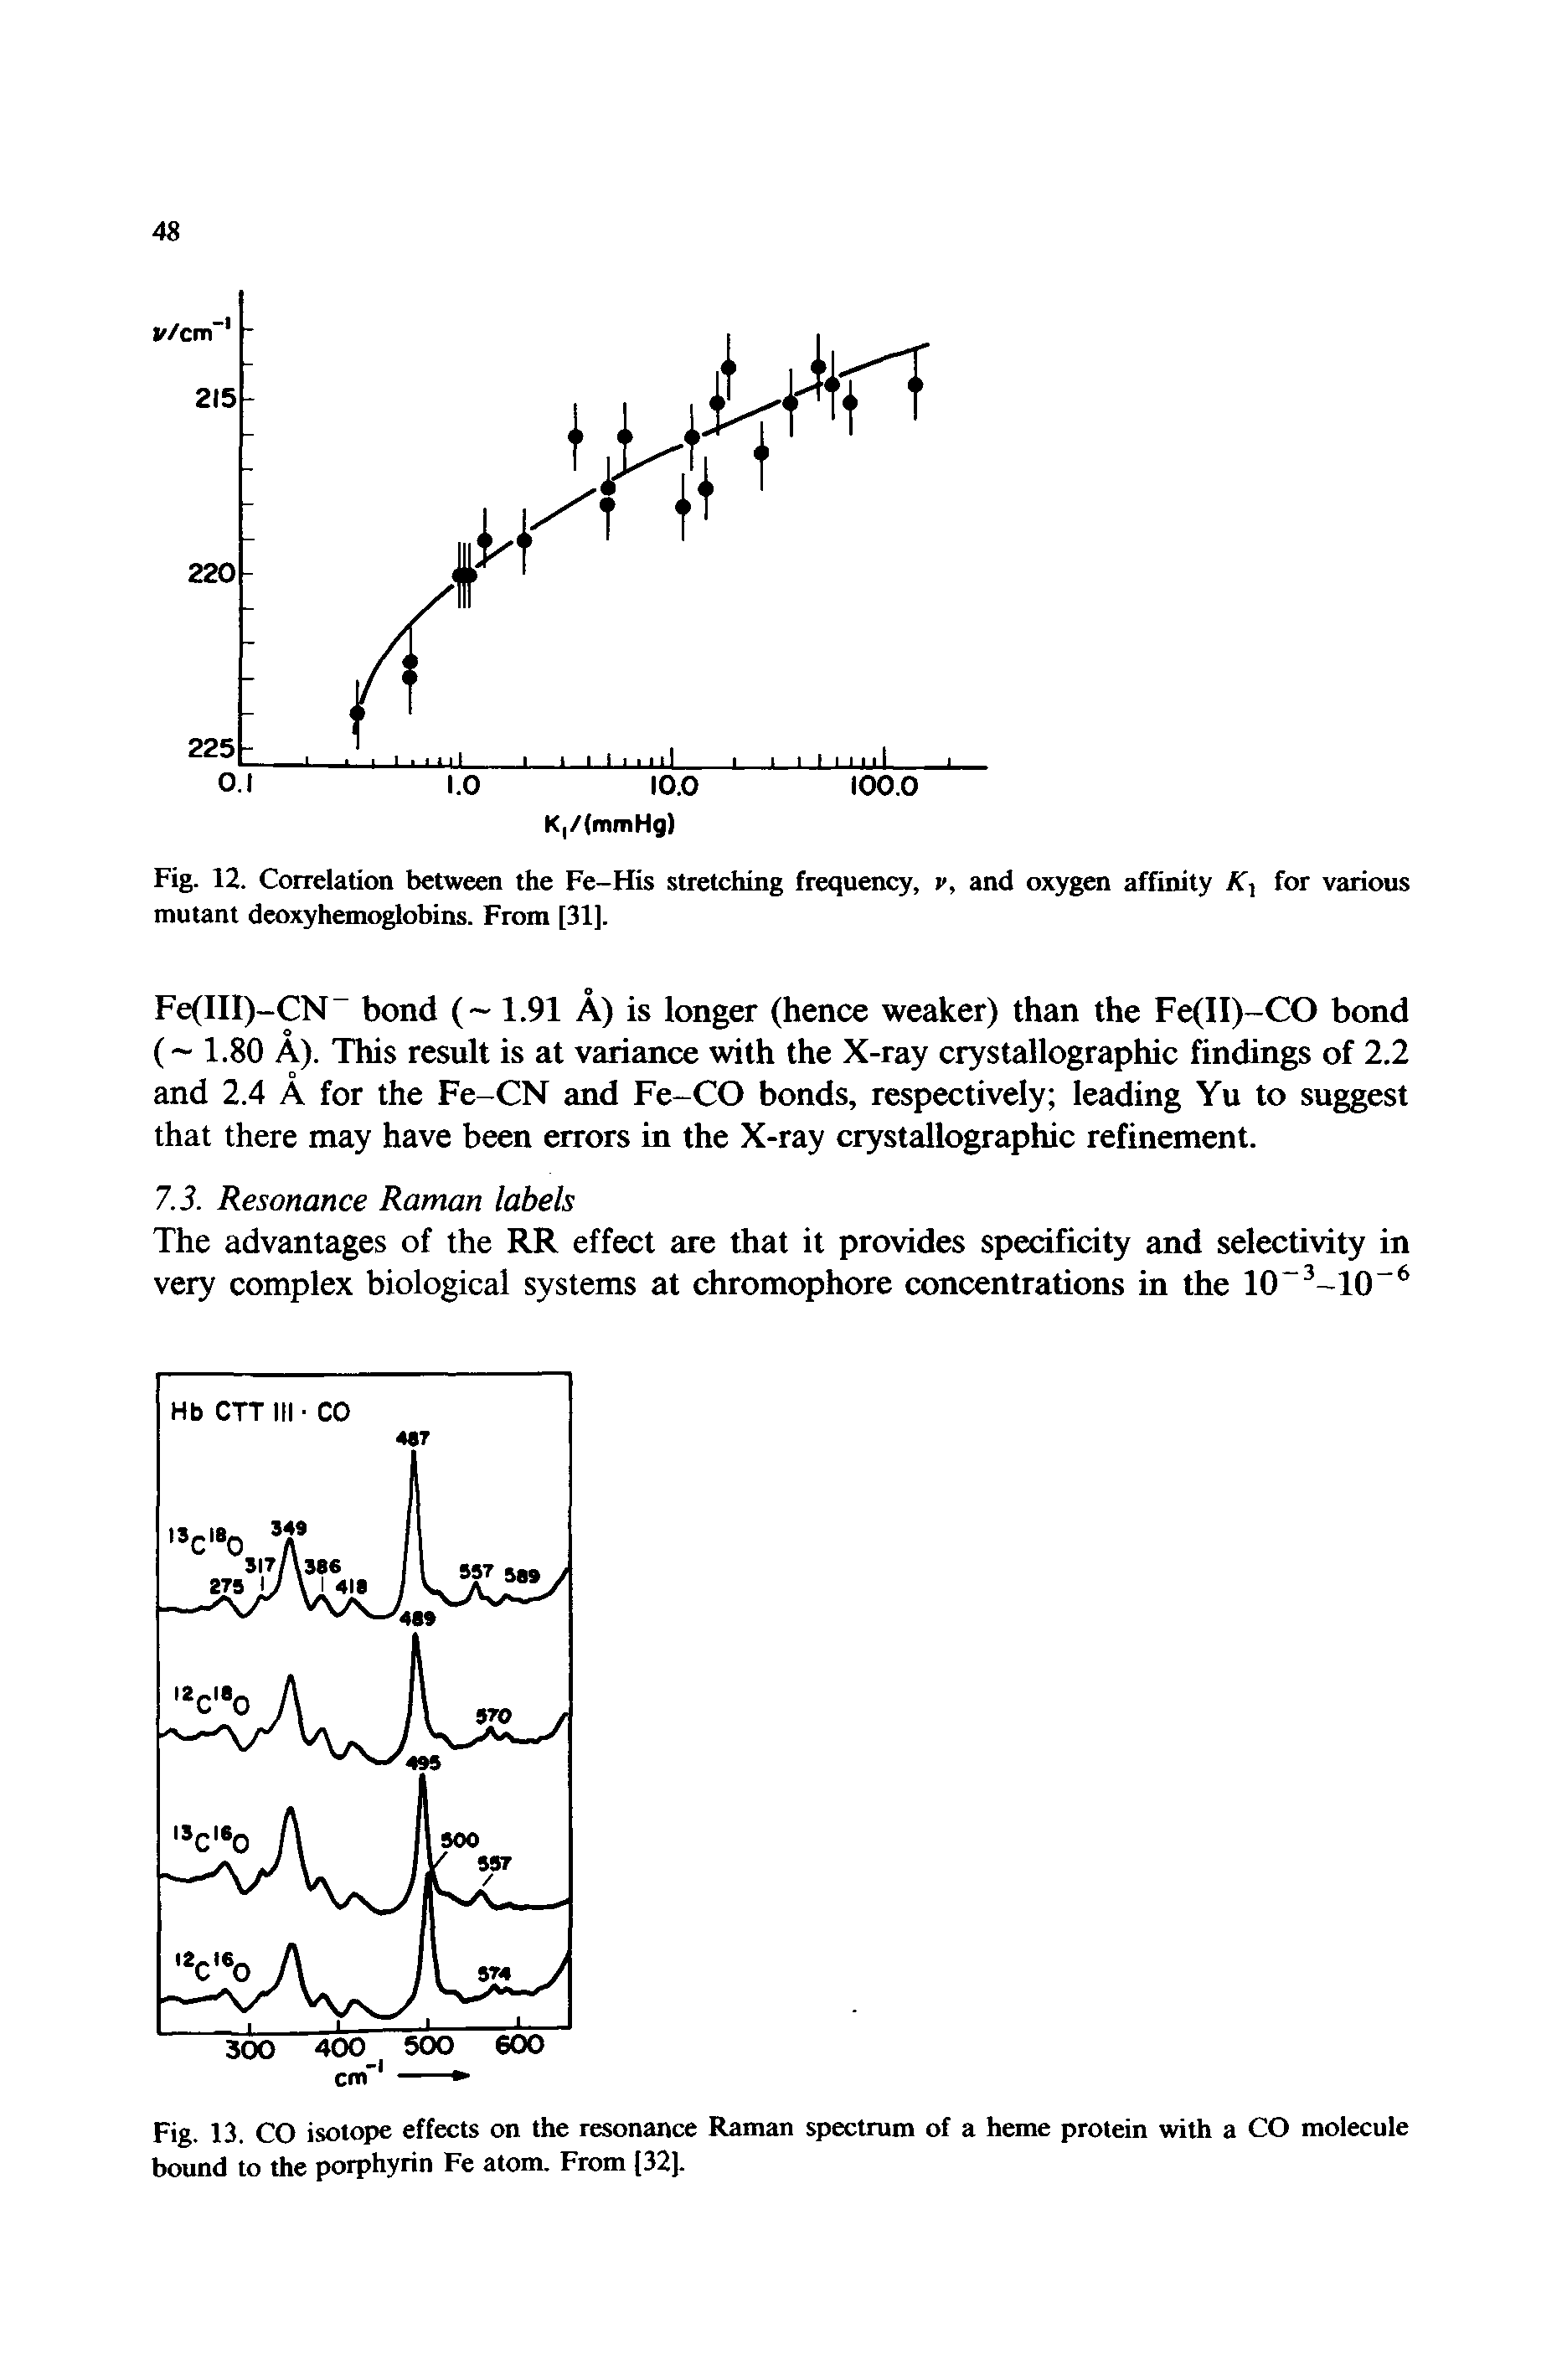 Fig. 13. CO isotope effects on the resonance Raman spectrum of a heme protein with a CO molecule bound to the porphyrin Fe atom. From [32].